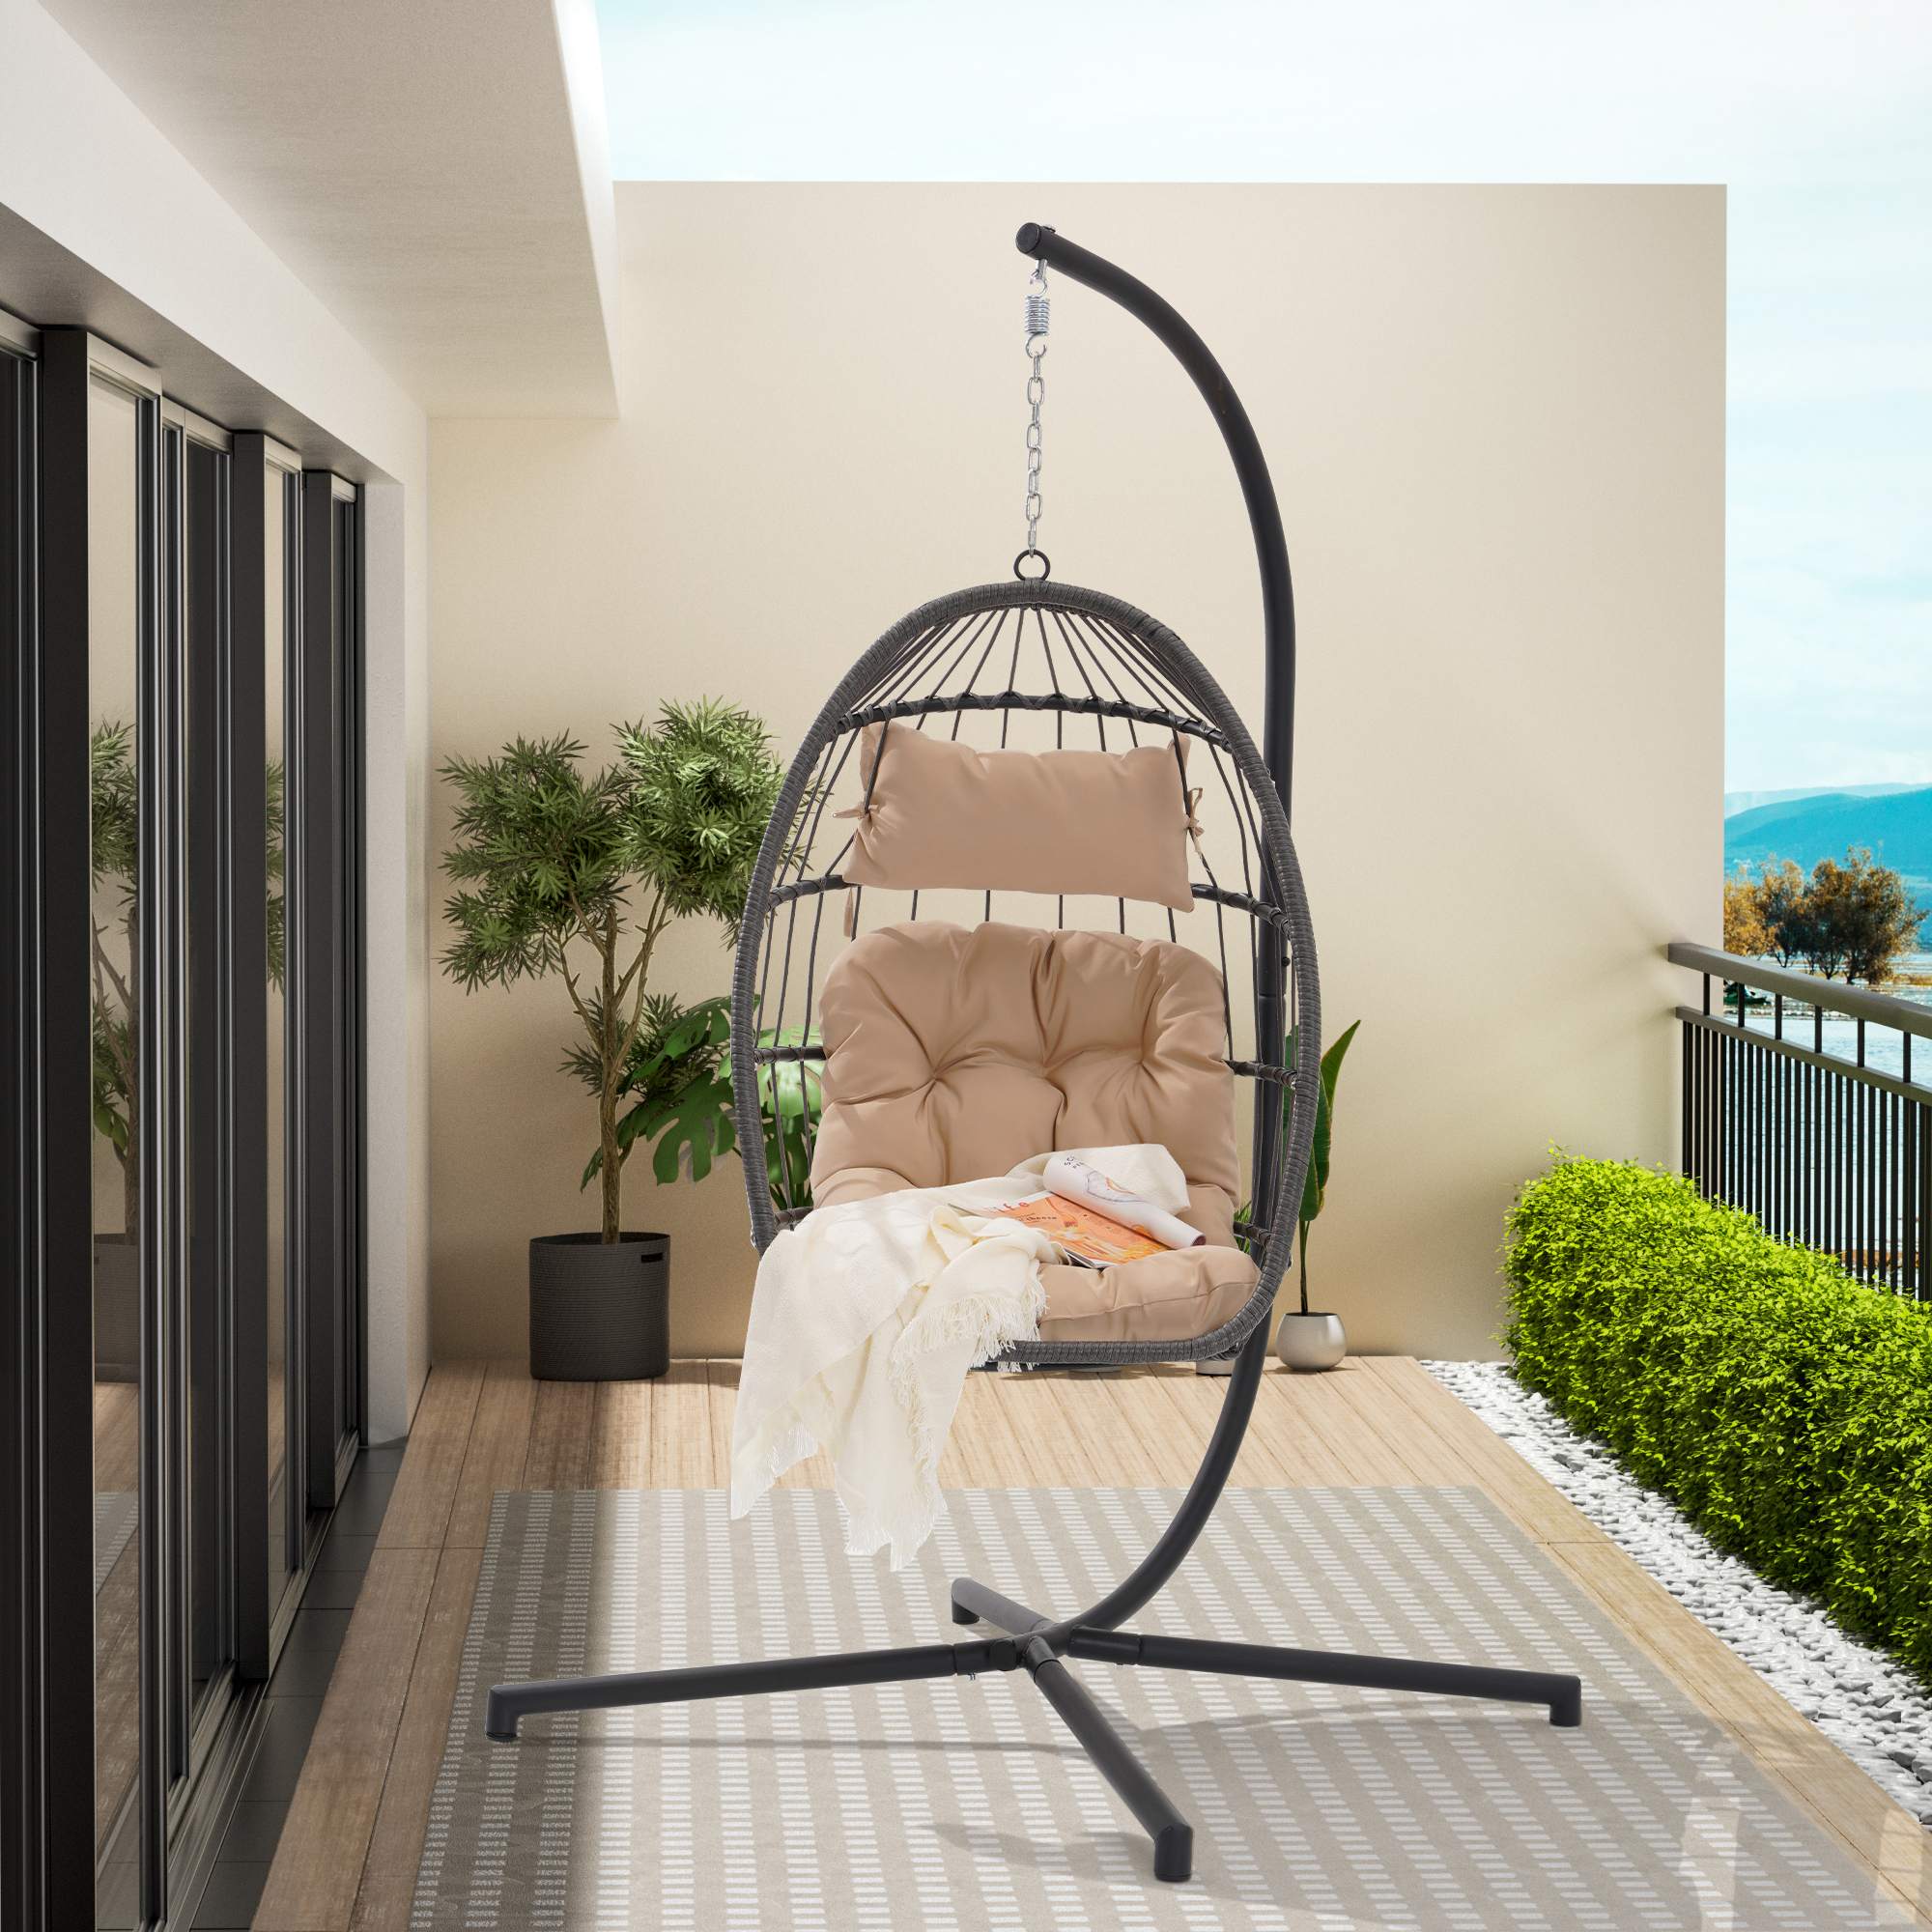 Wicker Swing Chair, BTMWAY Patio Foldable Egg Chair with Stand and Cushions, Outdoor All-weather Rattan Hammock Egg Chair Folding Hanging Chair for Balcony Backyard Garden Poolside, Holds 380lb, Beige - image 2 of 4